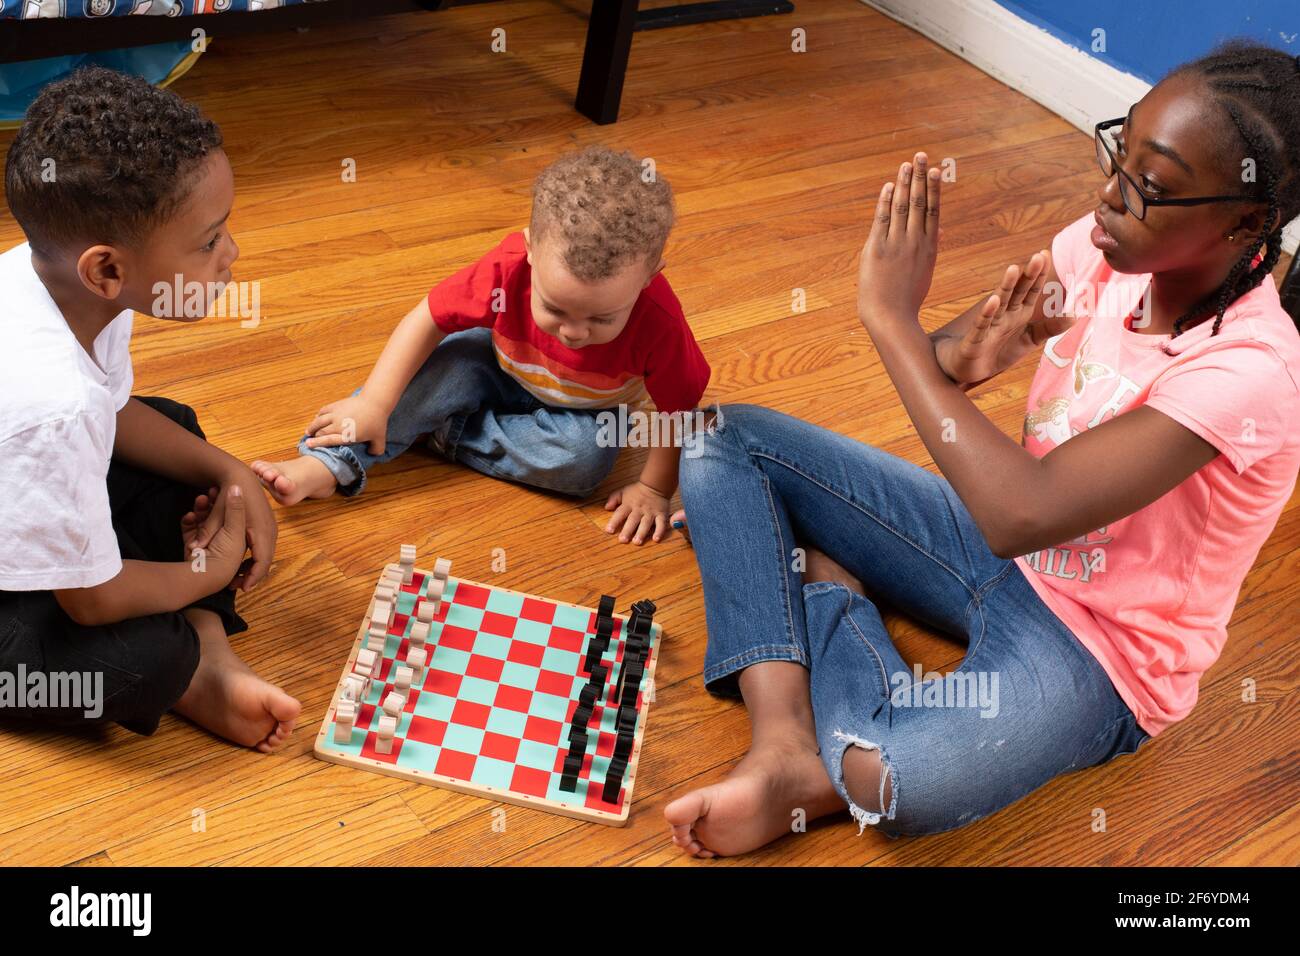 11 year old girl teaching her 6 year old brother how to play chess, 2 year old brother looking on, discribing how pieces can move with gesture in the Stock Photo